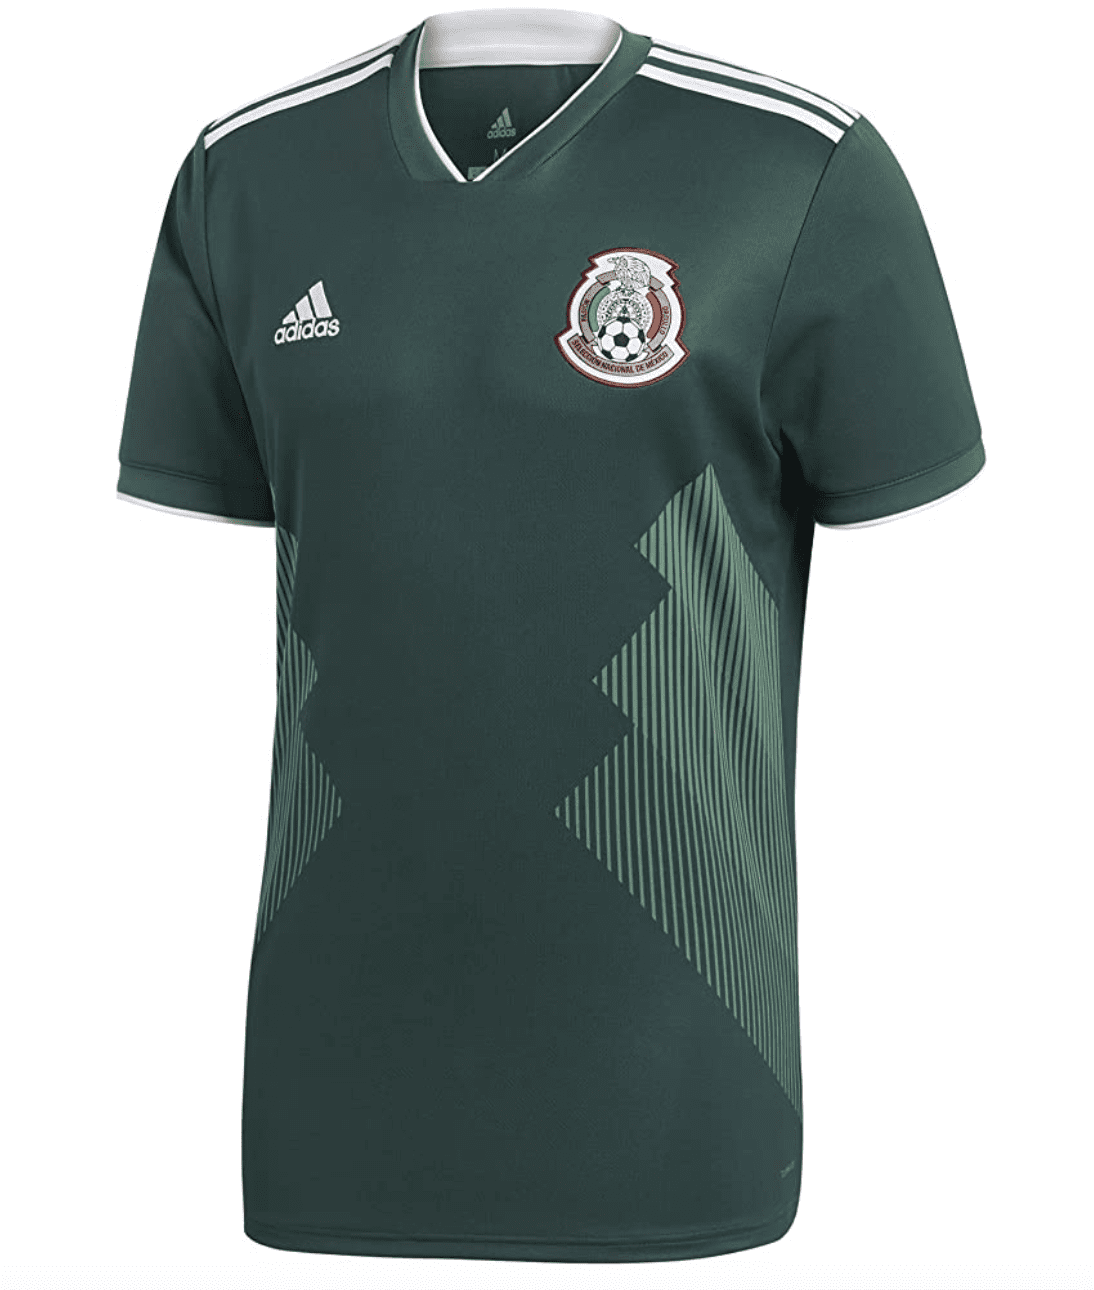 Adidas 2018 FIFA World Cup Mexico Official Home Jersey Collegiate Green/White